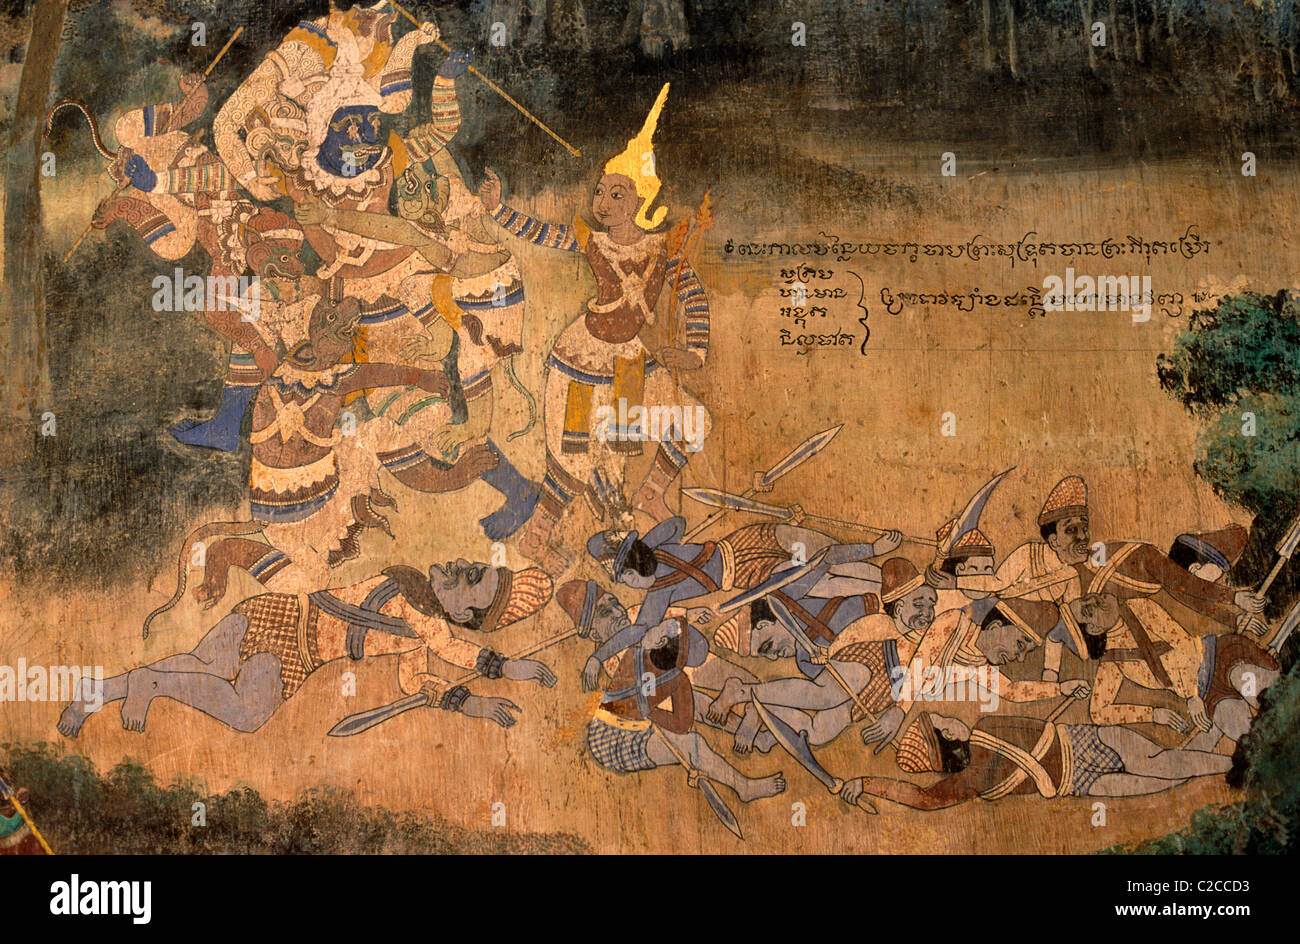 Mural of the Reamker poem showing war painted in 1903-1904 in poor condition, taken in 1995, Silver Pagoda, Phnom Penh, Cambodia, Asia Stock Photo